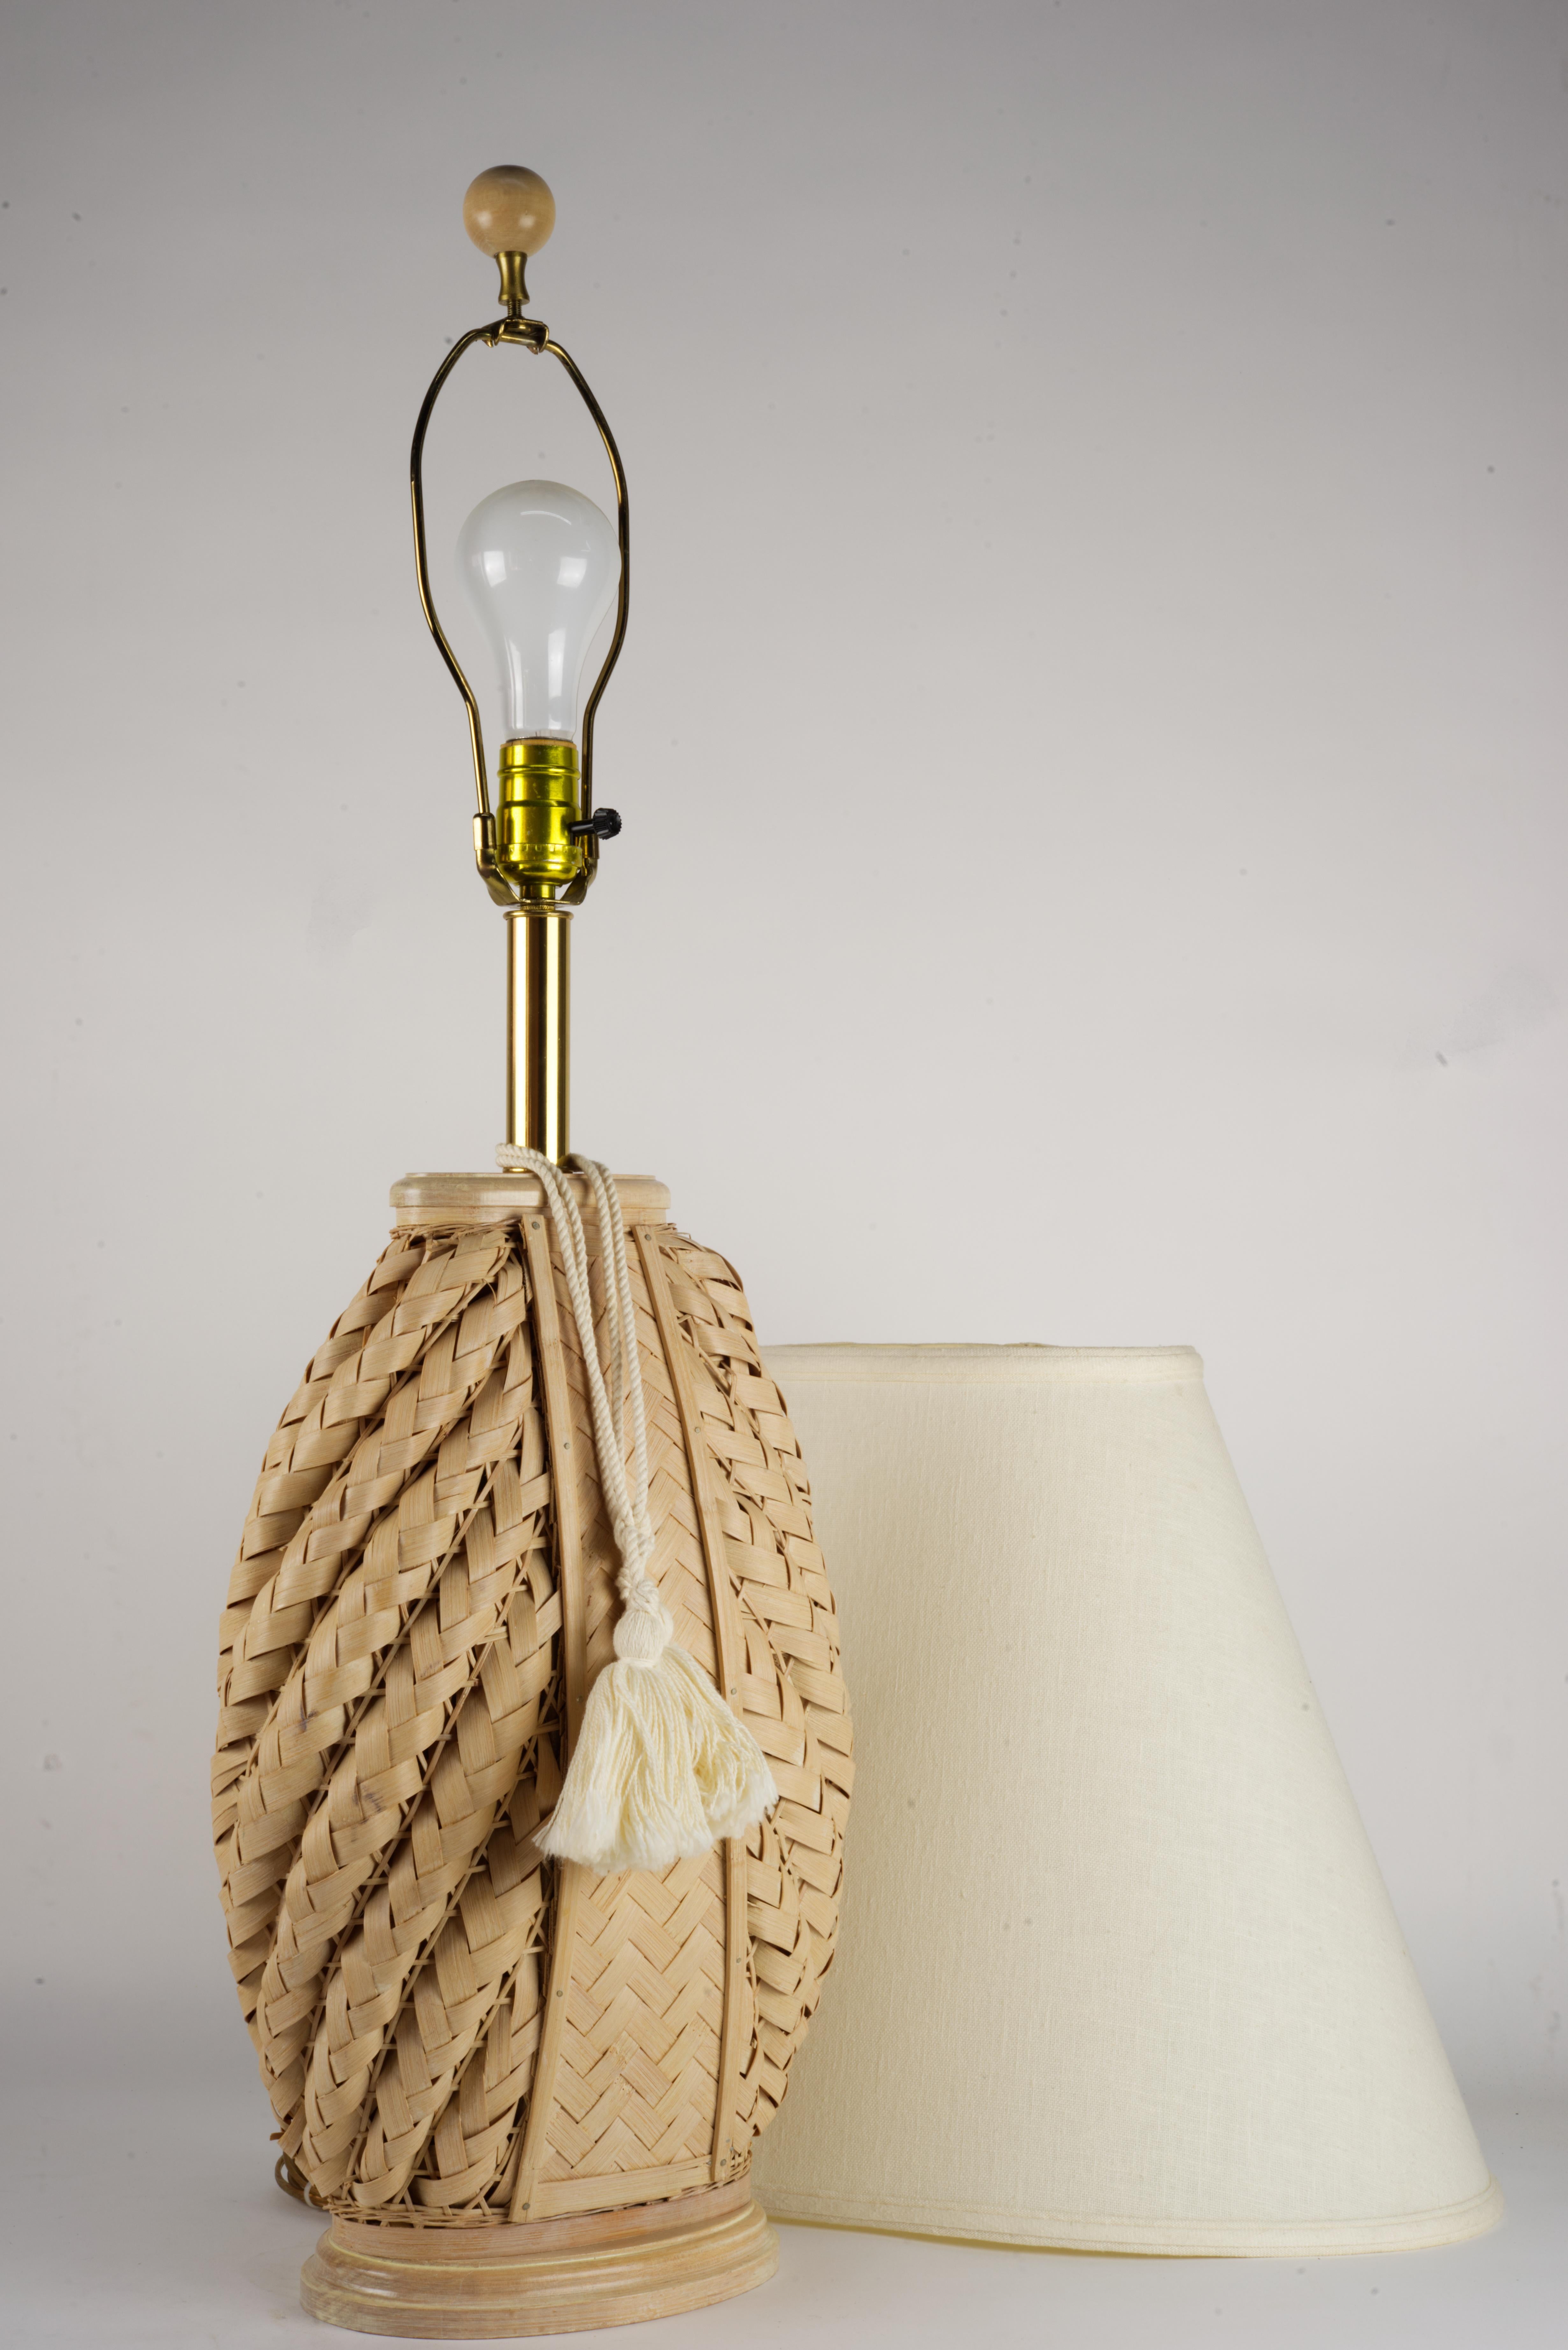 Sculptural Coastal Rattan Table Lamp Organic Modern Wood Base In Good Condition For Sale In Clifton Springs, NY